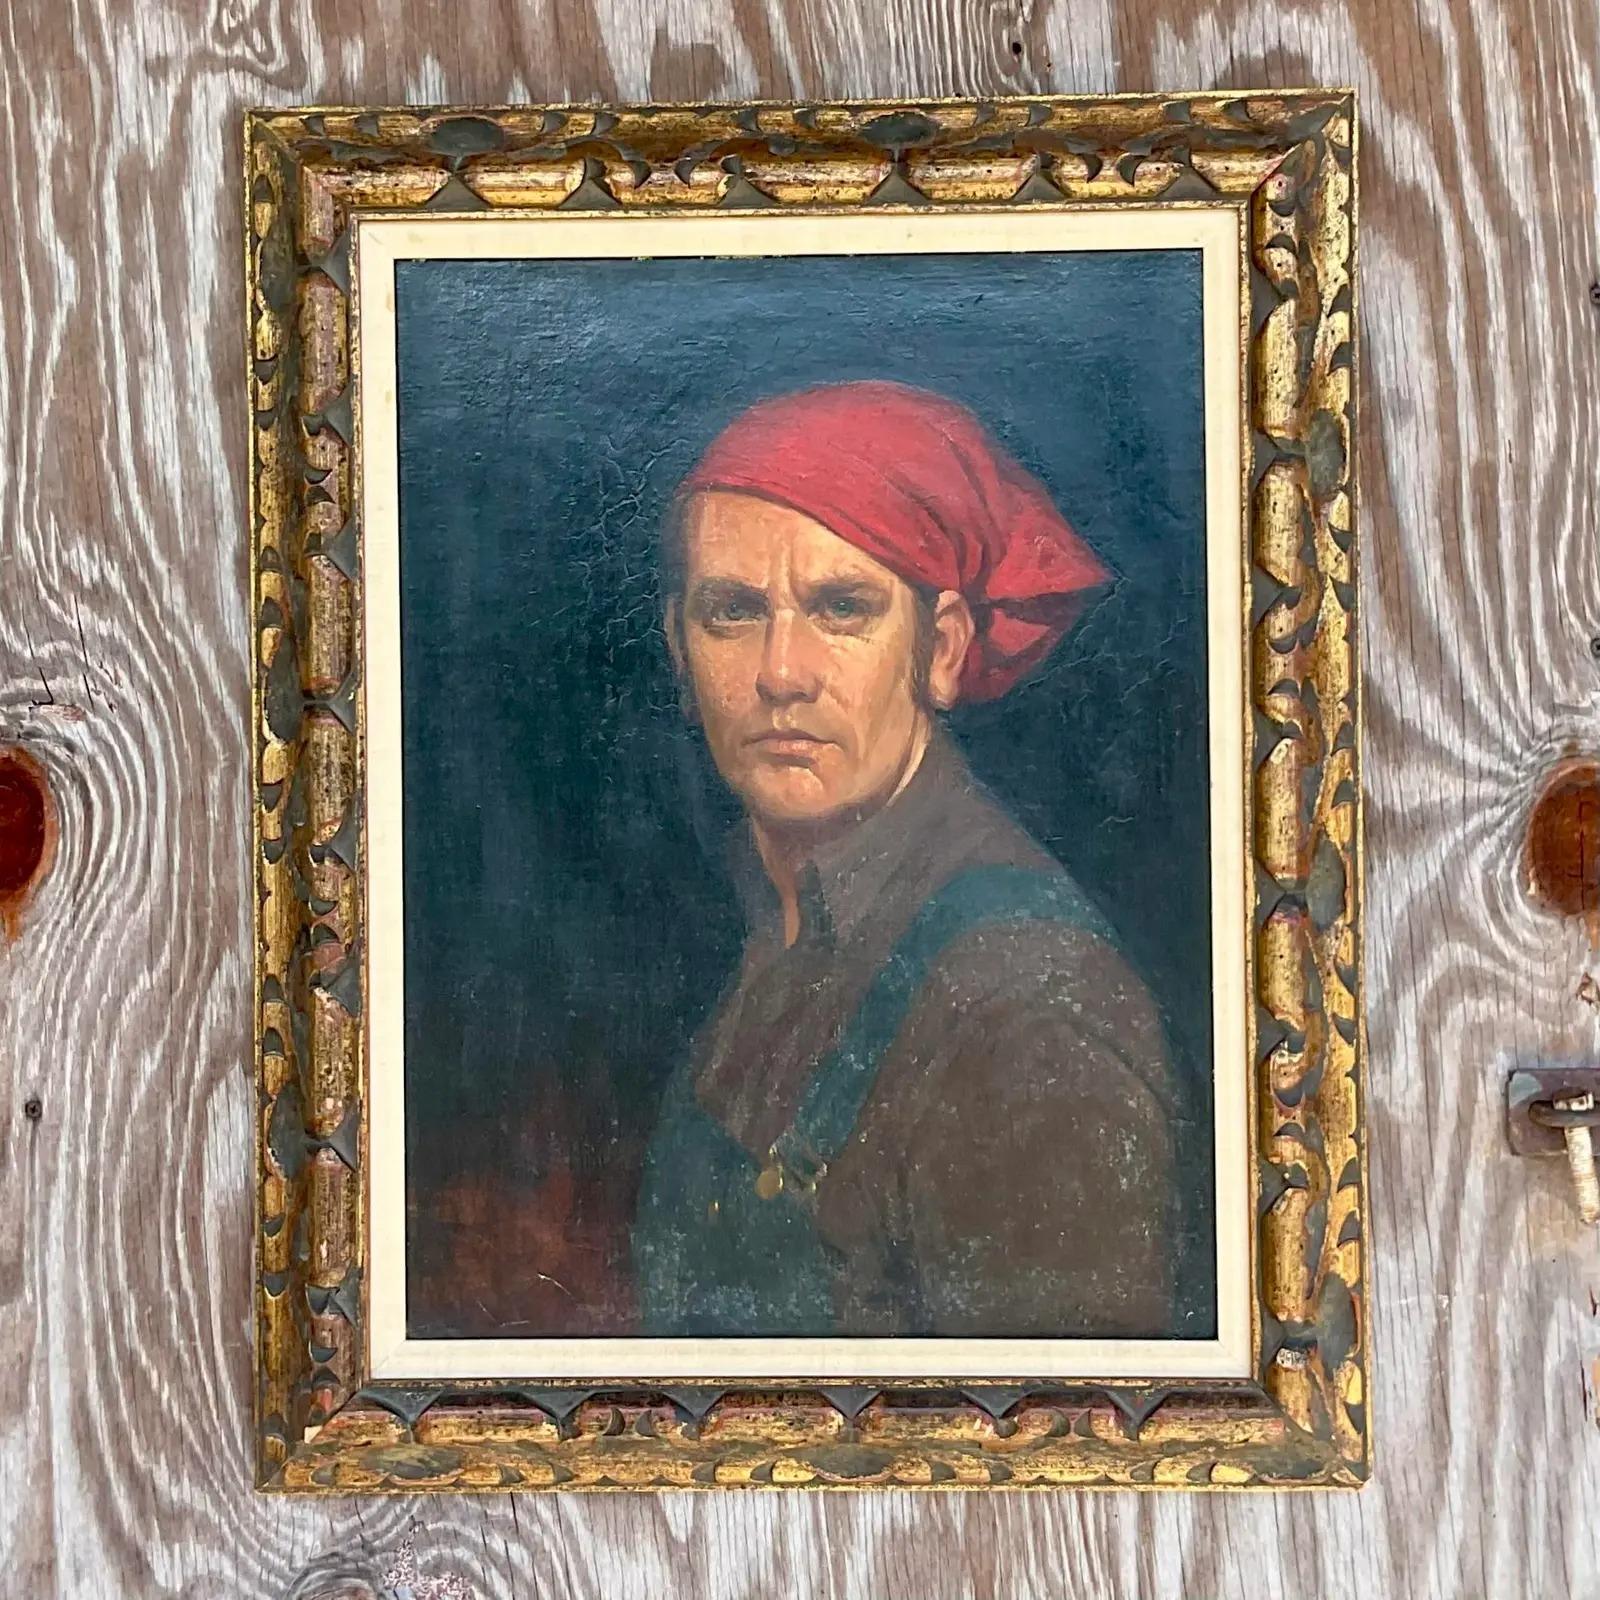 A fantastic vintage boho original oil portrait. A beautiful composition of a man in a headscarf. Signed and dated by the artist 1971